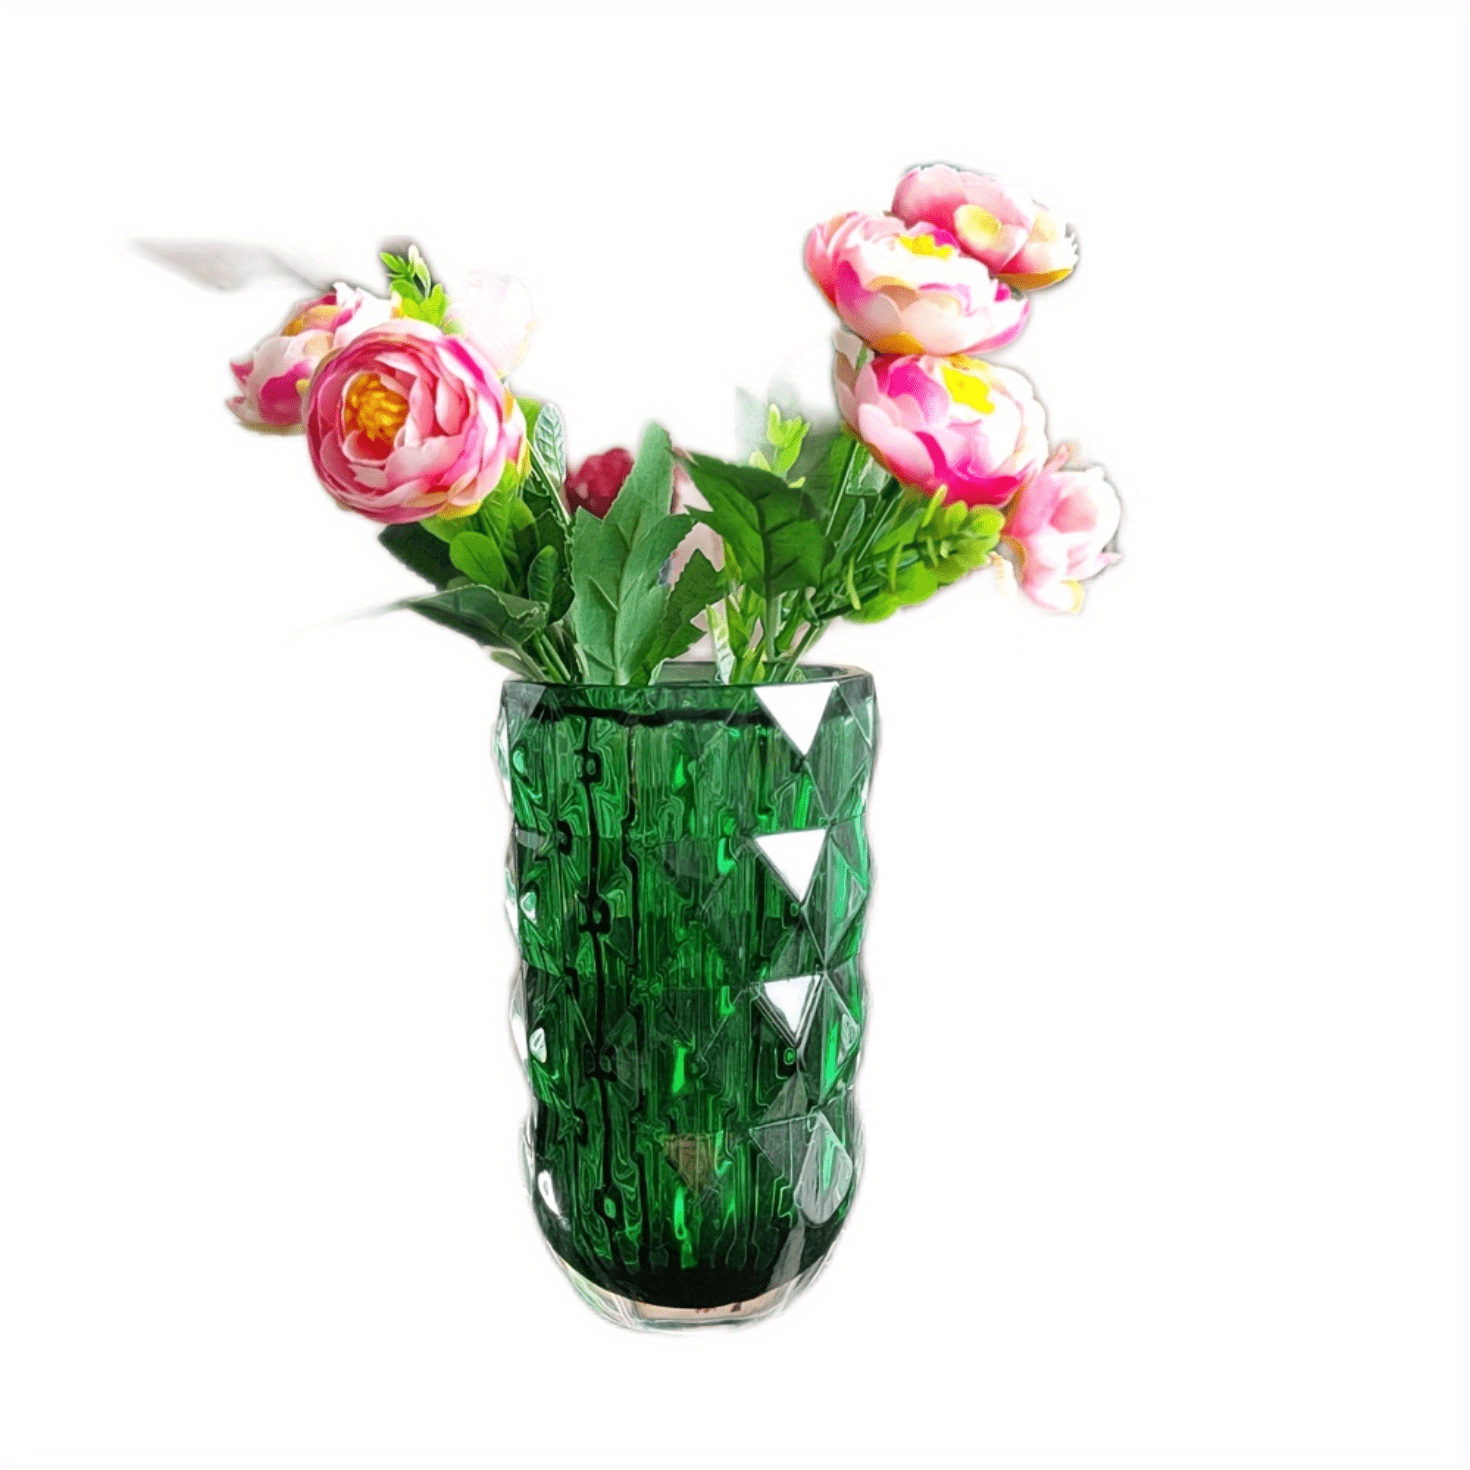 1pc, Crystal Glass Vase, Round Multi-color Vase For Home Decor, Wedding Or Gift